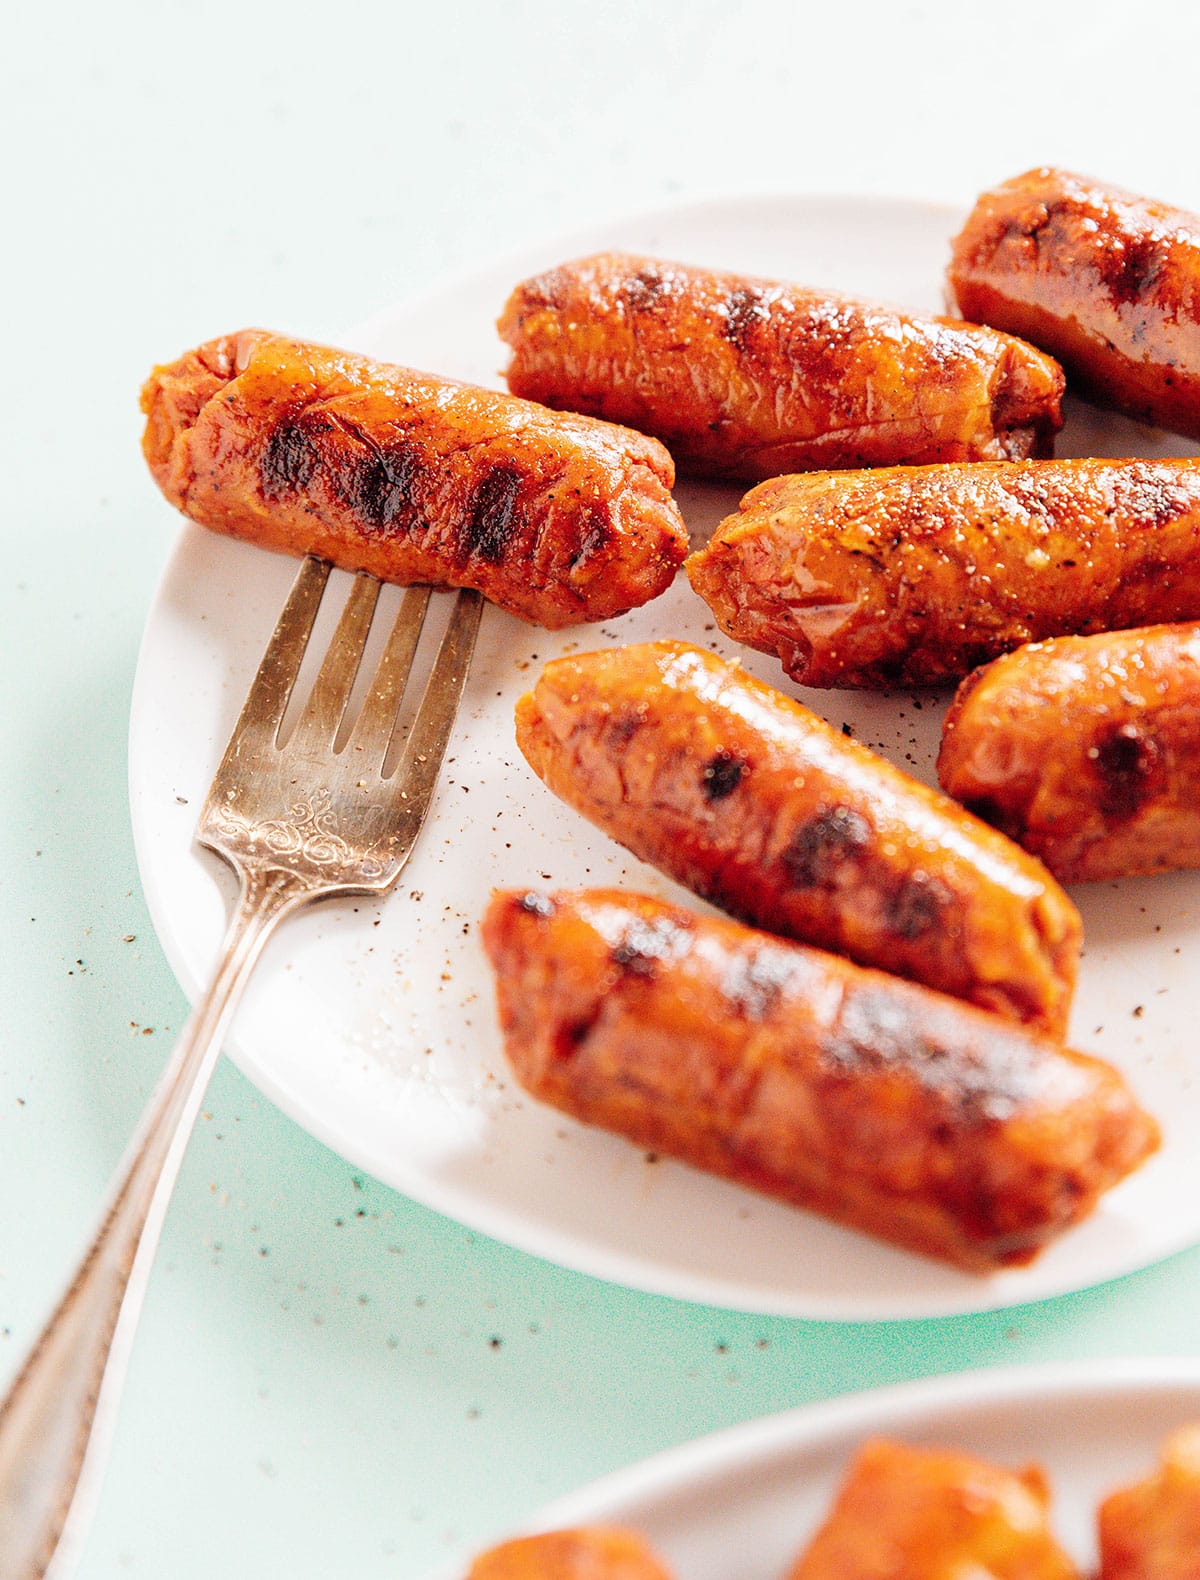 A fork on a plate of plant-based sausage links.